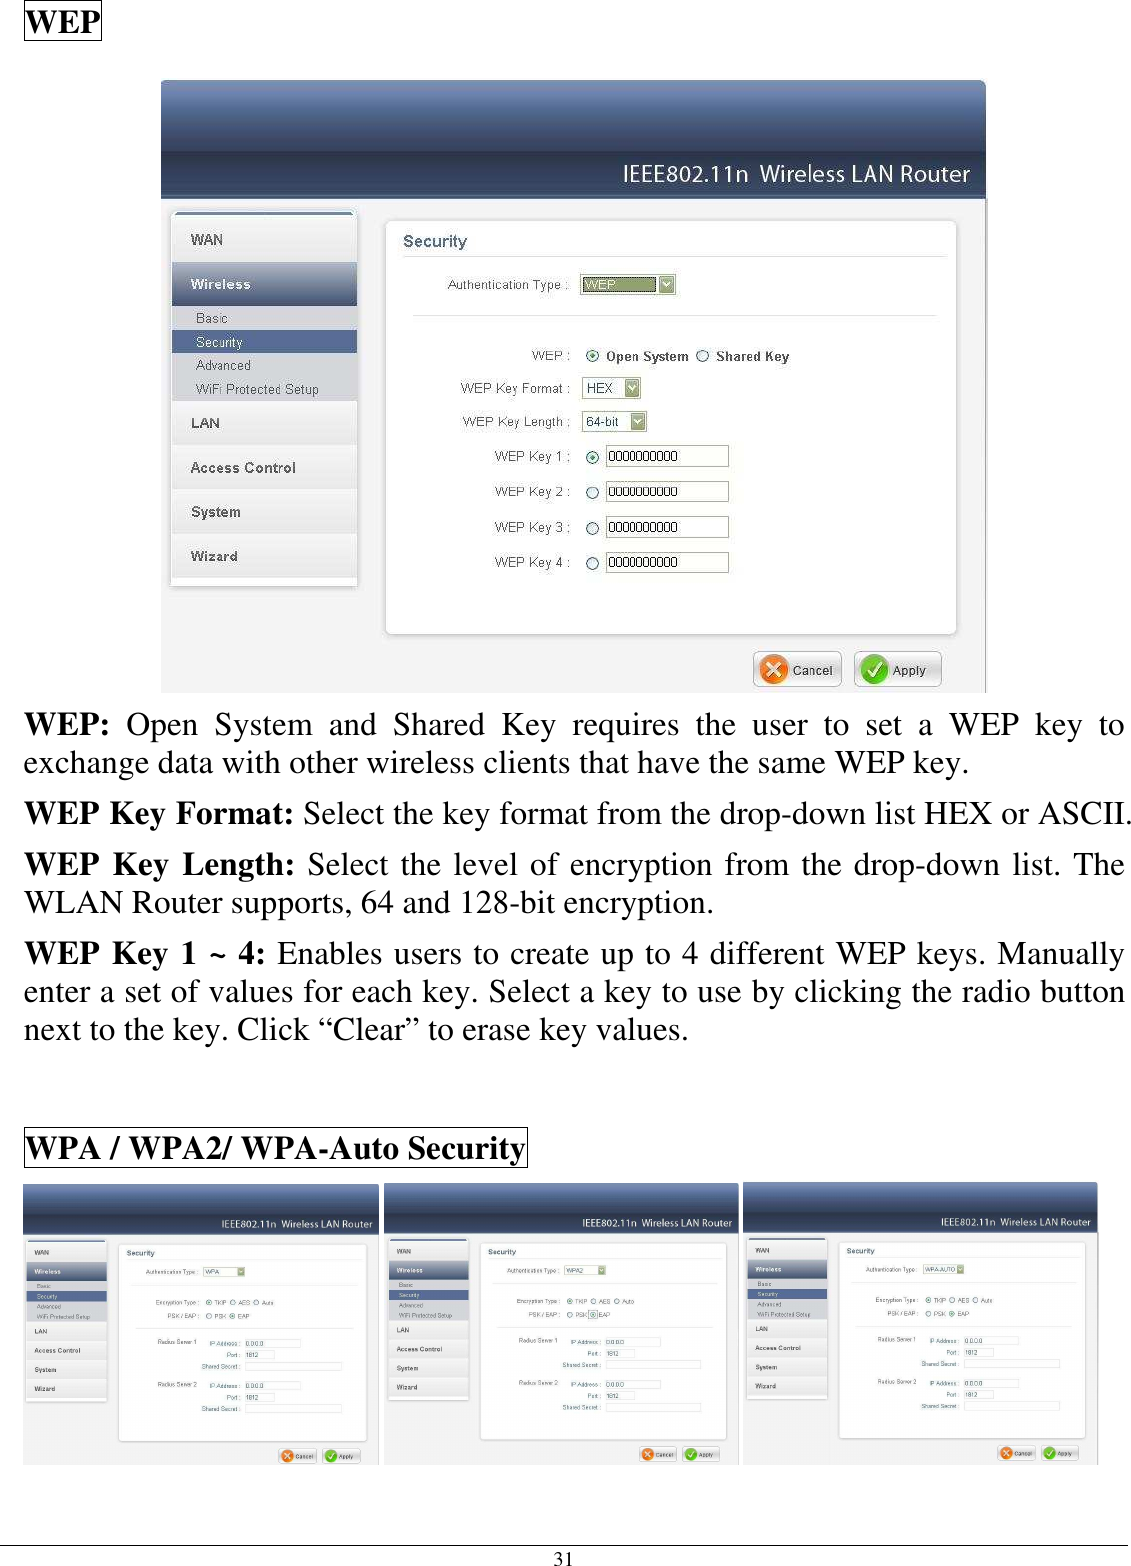 31 WEP  WEP:  Open  System  and  Shared  Key  requires  the  user  to  set  a  WEP  key  to exchange data with other wireless clients that have the same WEP key. WEP Key Format: Select the key format from the drop-down list HEX or ASCII. WEP Key Length: Select the level of encryption from the drop-down list. The WLAN Router supports, 64 and 128-bit encryption. WEP Key 1 ~ 4: Enables users to create up to 4 different WEP keys. Manually enter a set of values for each key. Select a key to use by clicking the radio button next to the key. Click “Clear” to erase key values.  WPA / WPA2/ WPA-Auto Security       